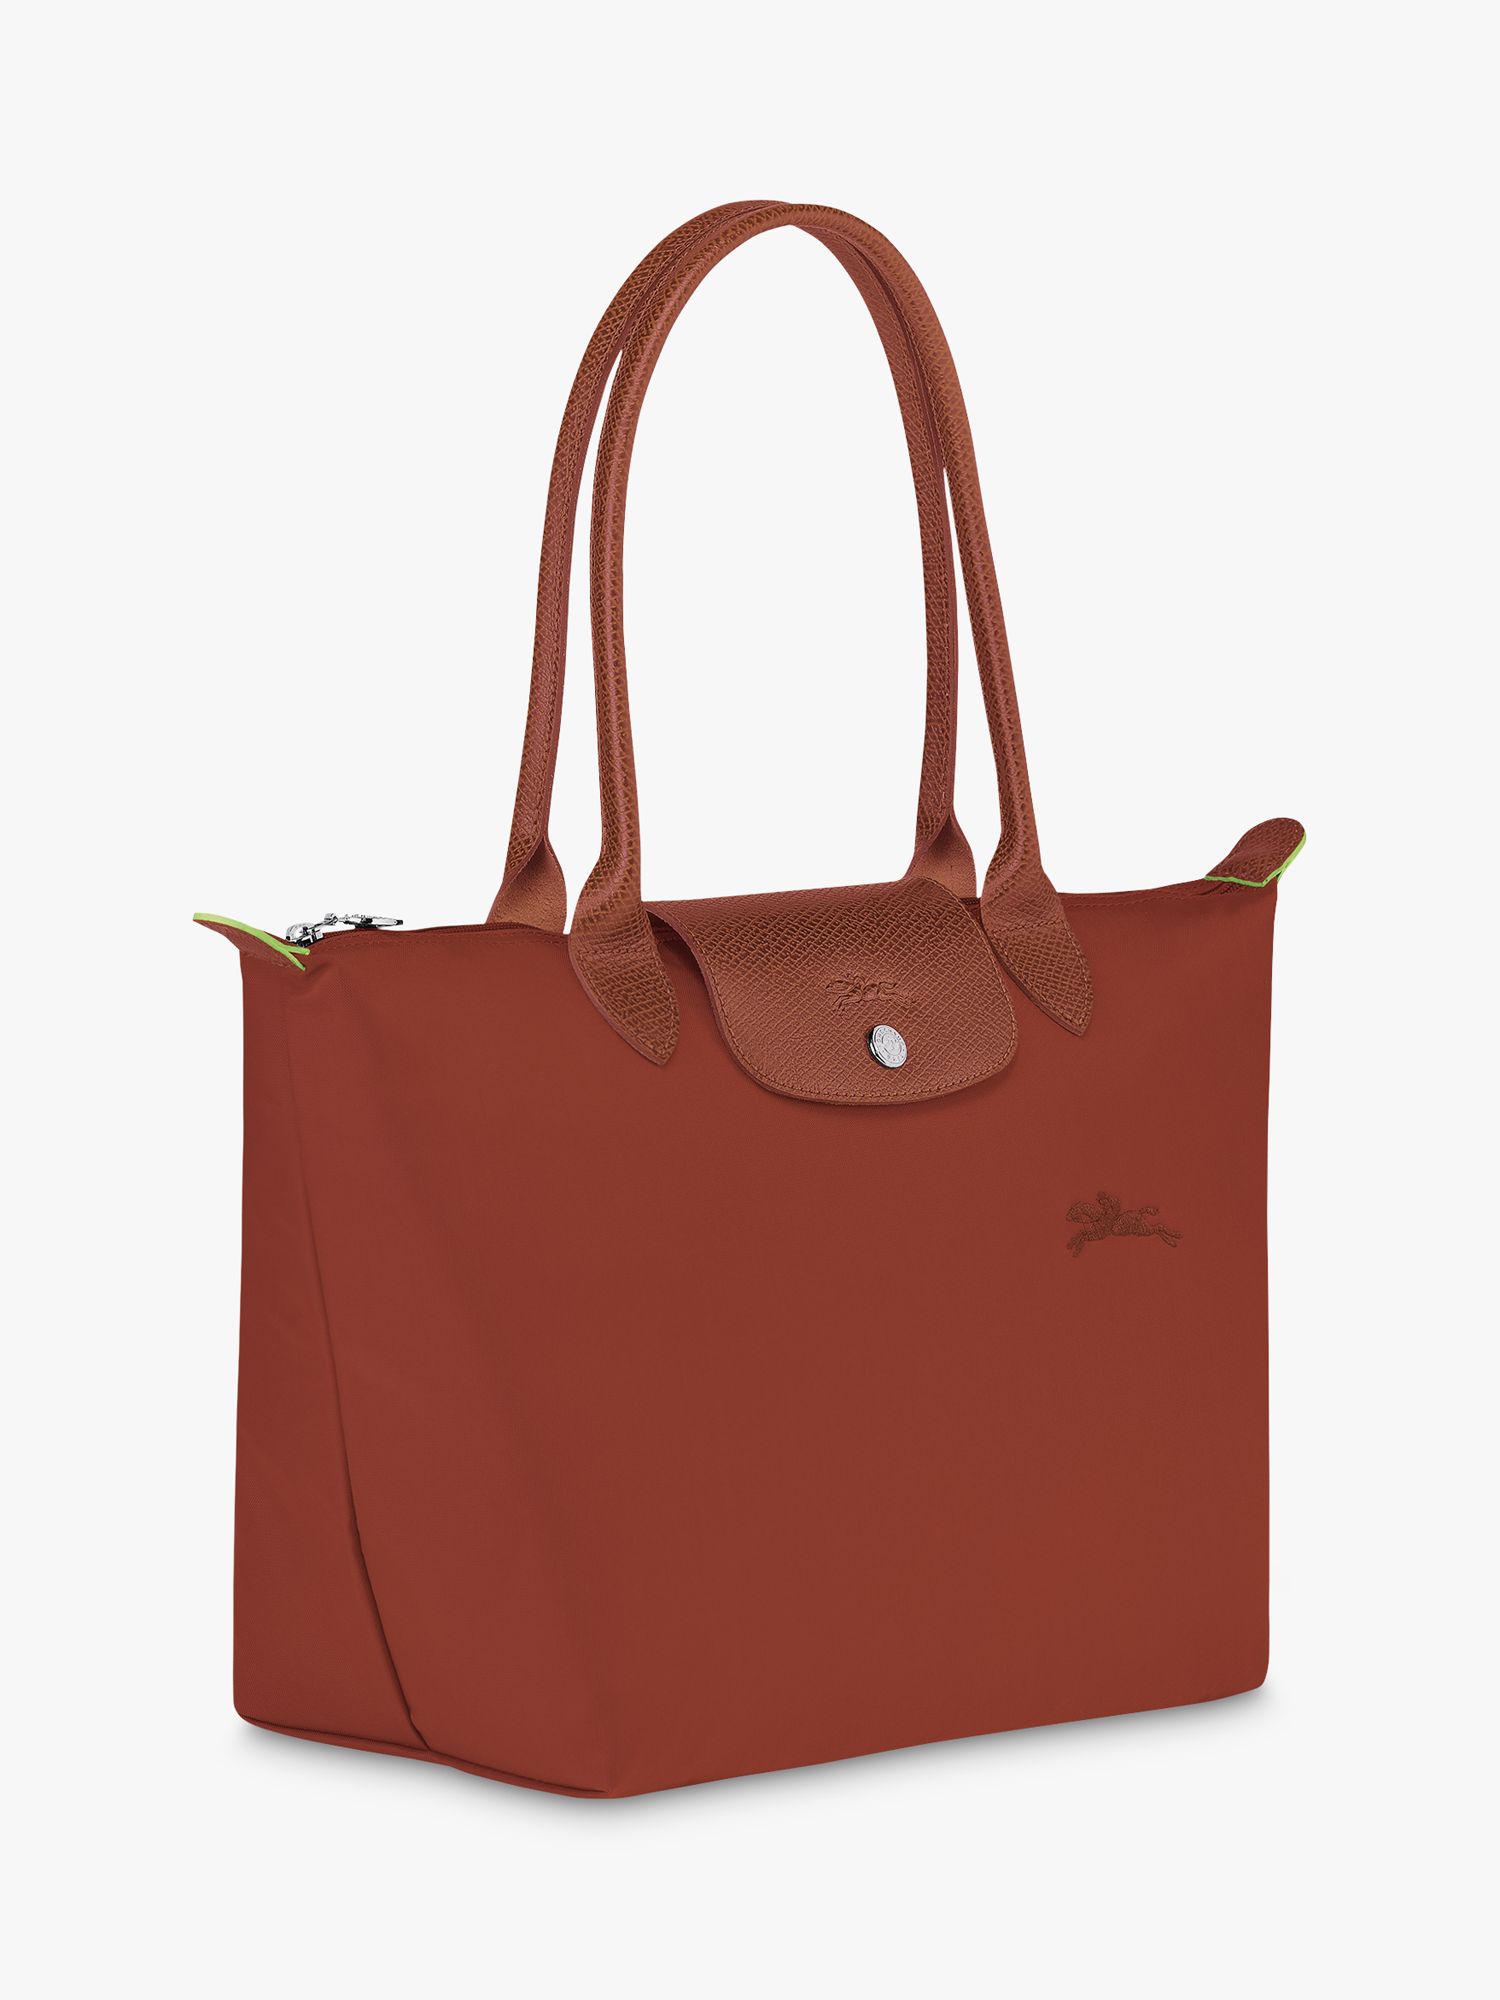 Longchamp Le Pliage Green Recycled Tote Bag, Chestnut